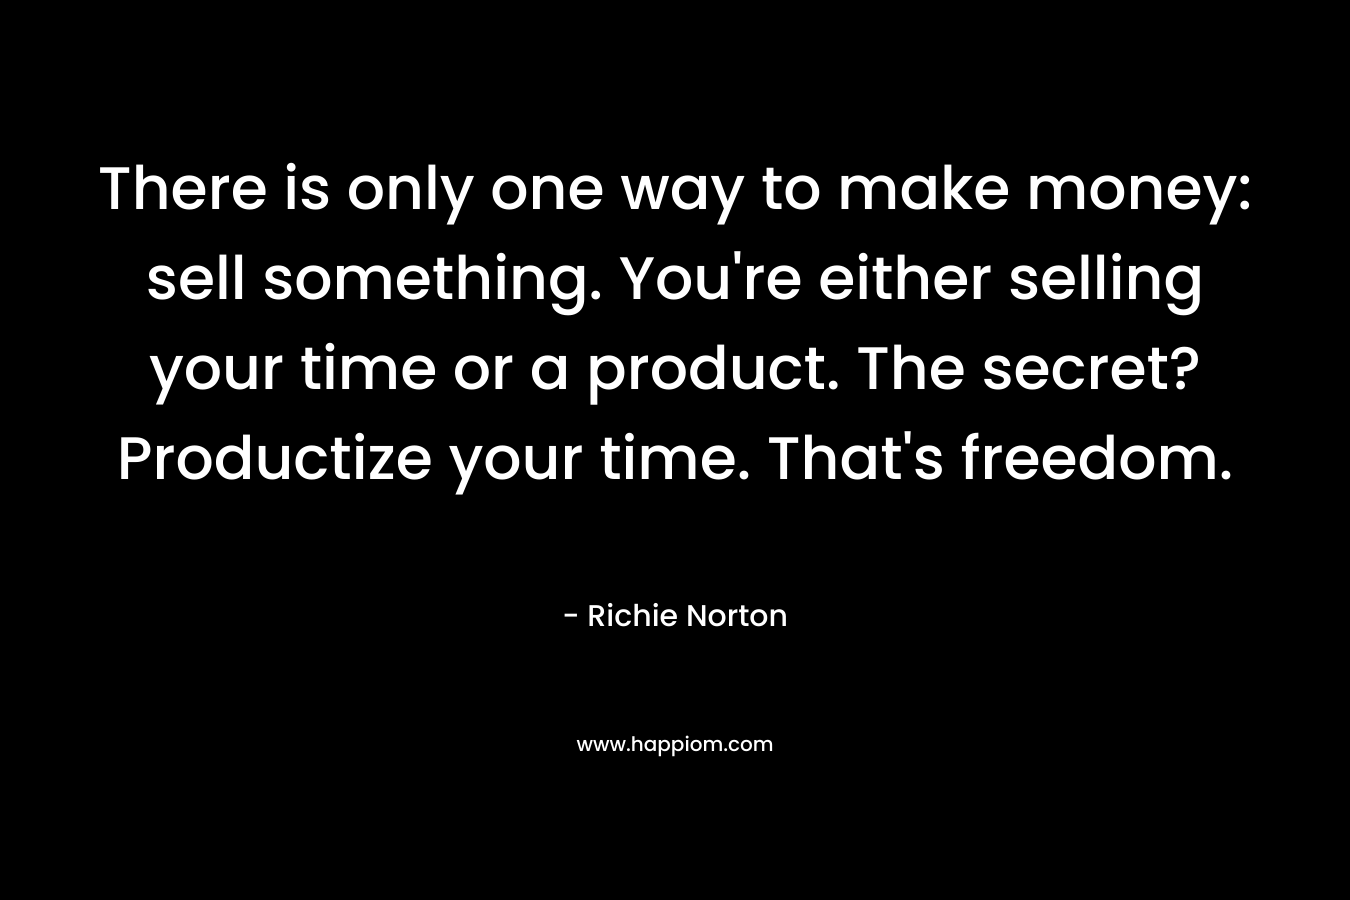 There is only one way to make money: sell something. You're either selling your time or a product. The secret? Productize your time. That's freedom.